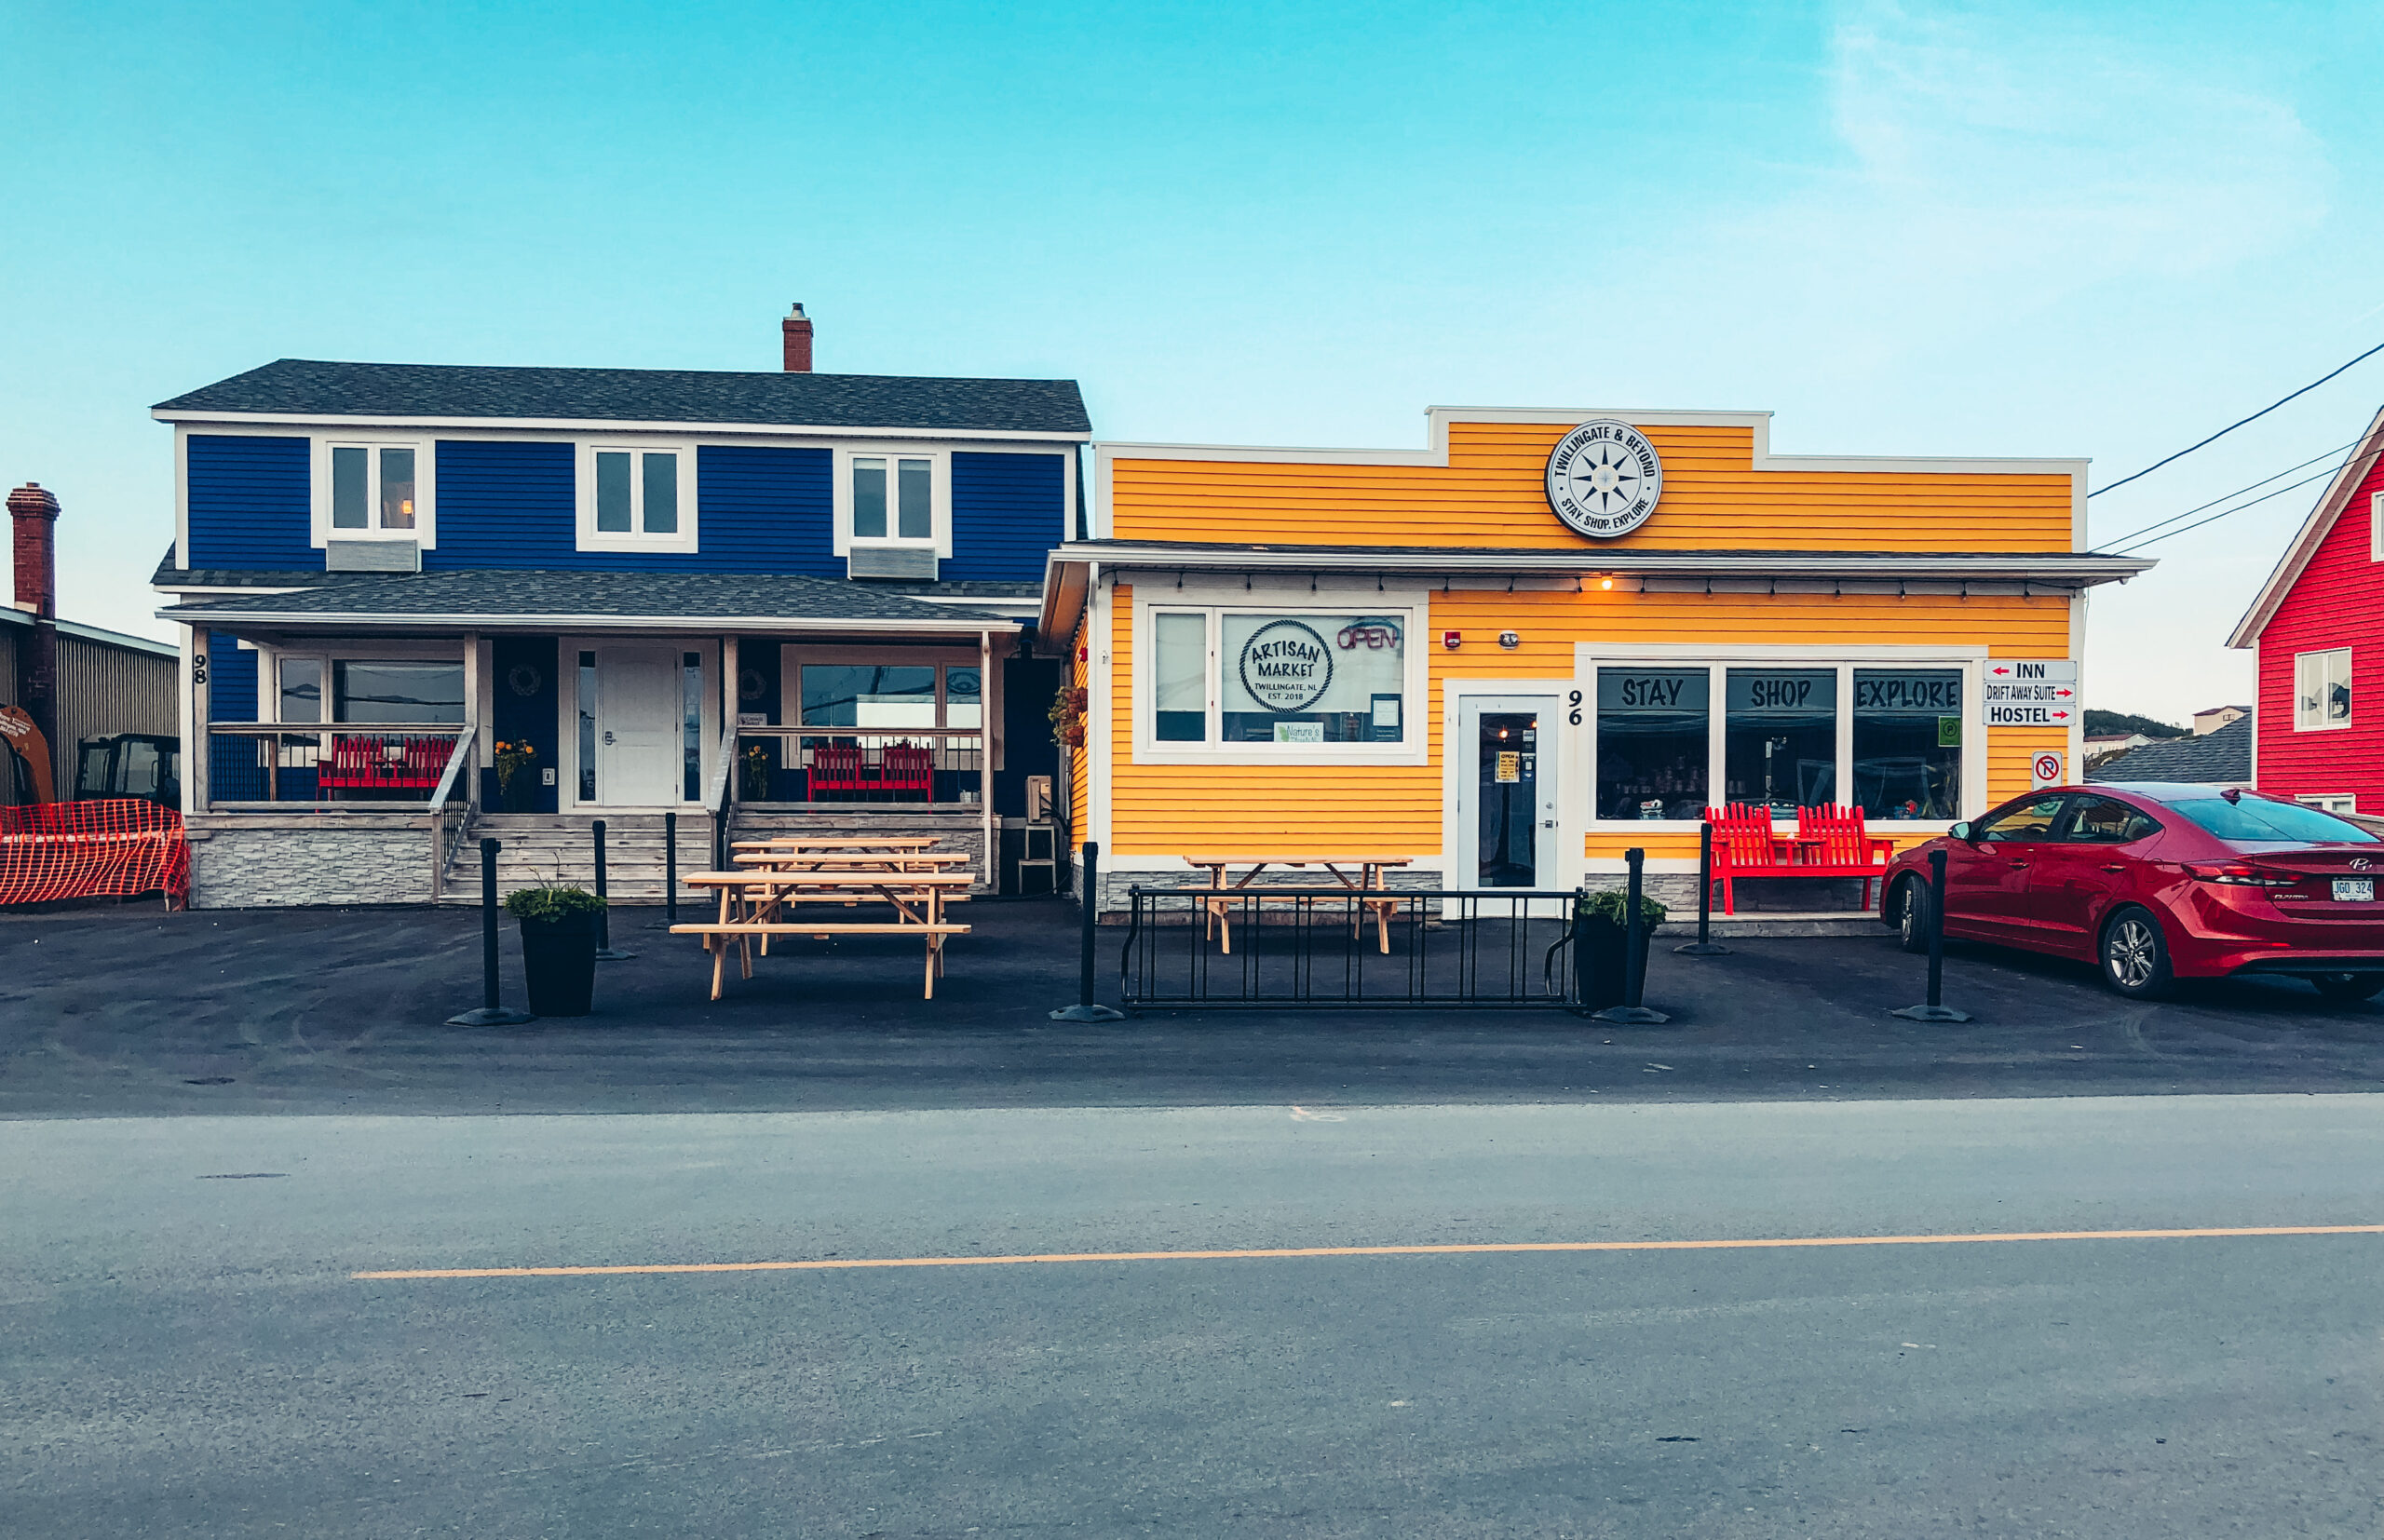 A photo of 2 buildings side by side in downtown Twillingate. There is a blue house which is another vacation rental from Twillingate and Beyond, and next to it is a yellow building which houses their artisan market on the front and the Drift Away Suite in the back.